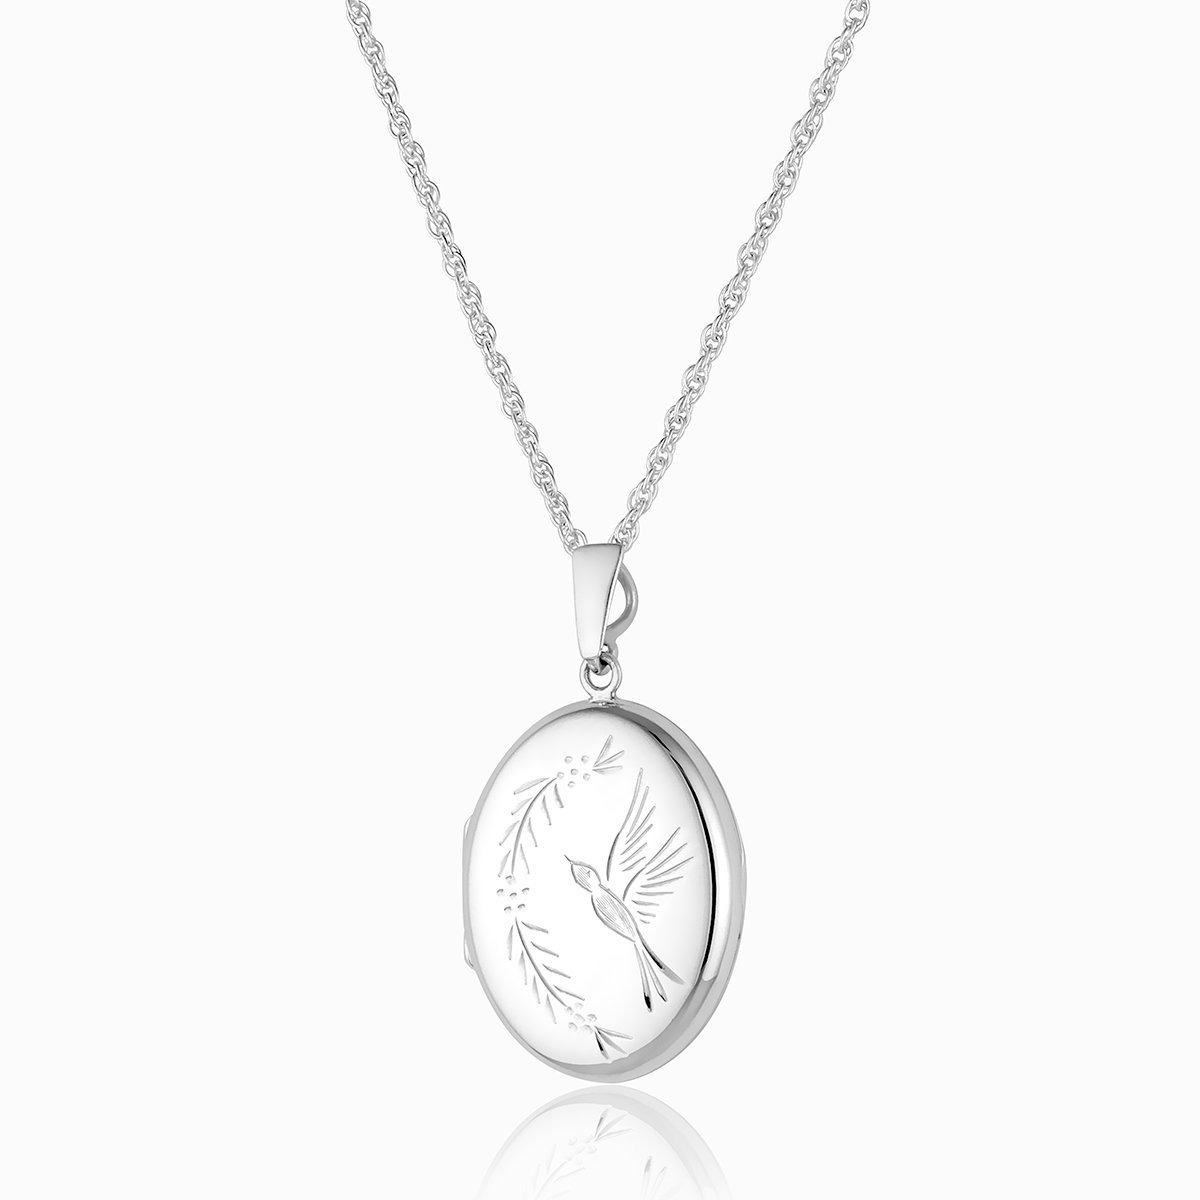 Product title: Hand Engraved Oval Bird Locket, product type: Locket